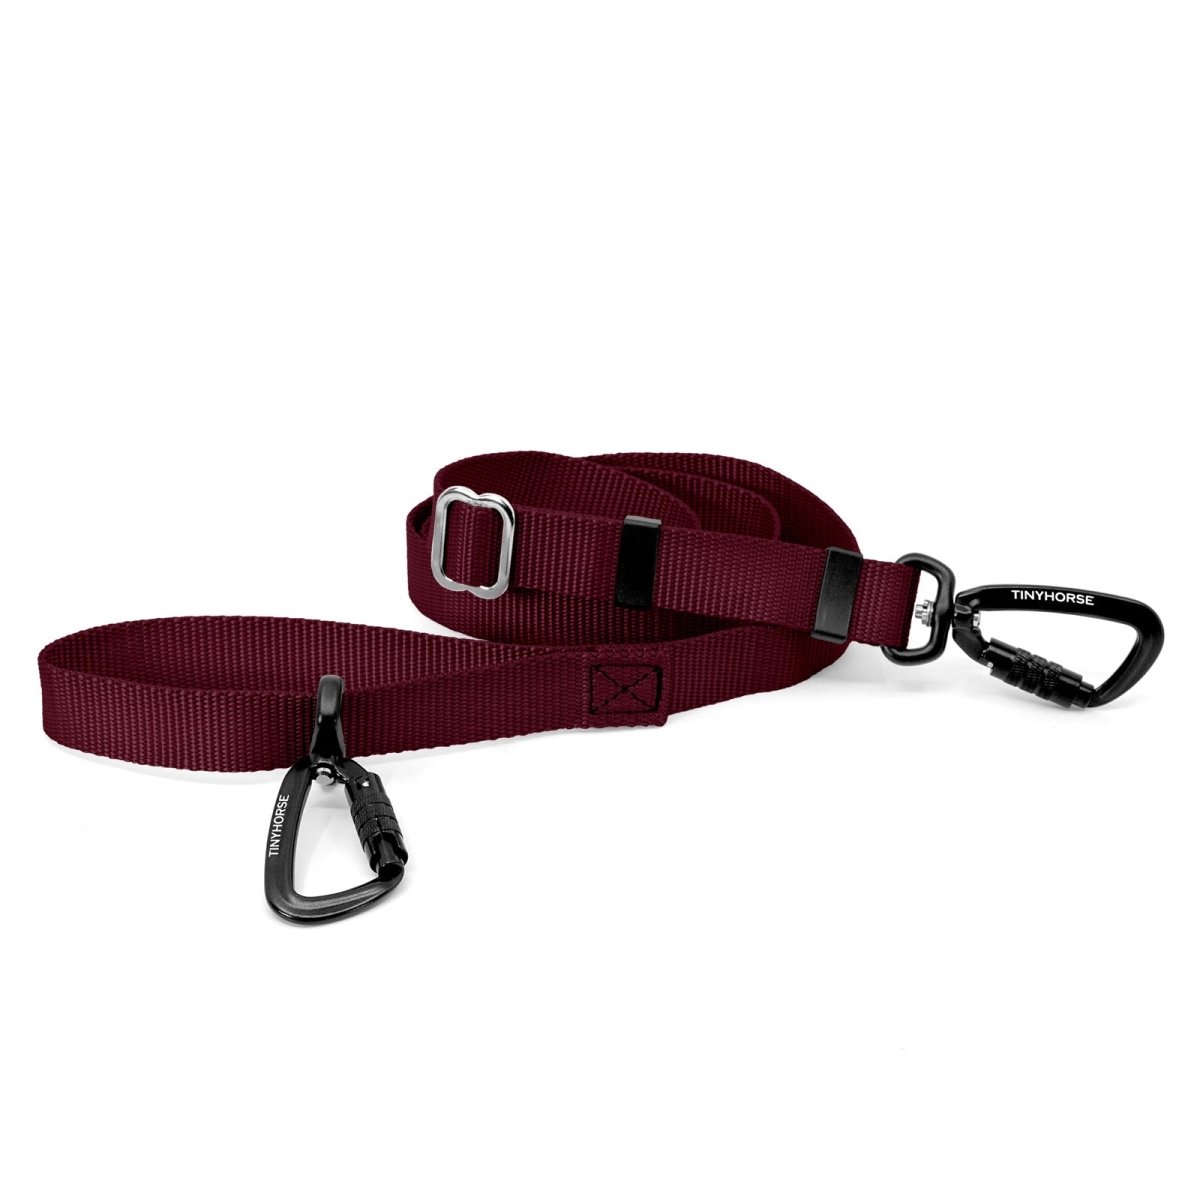 A burgundy-coloured Lead-All Lite Extra with 2 auto-locking carabiners and nylon webbing